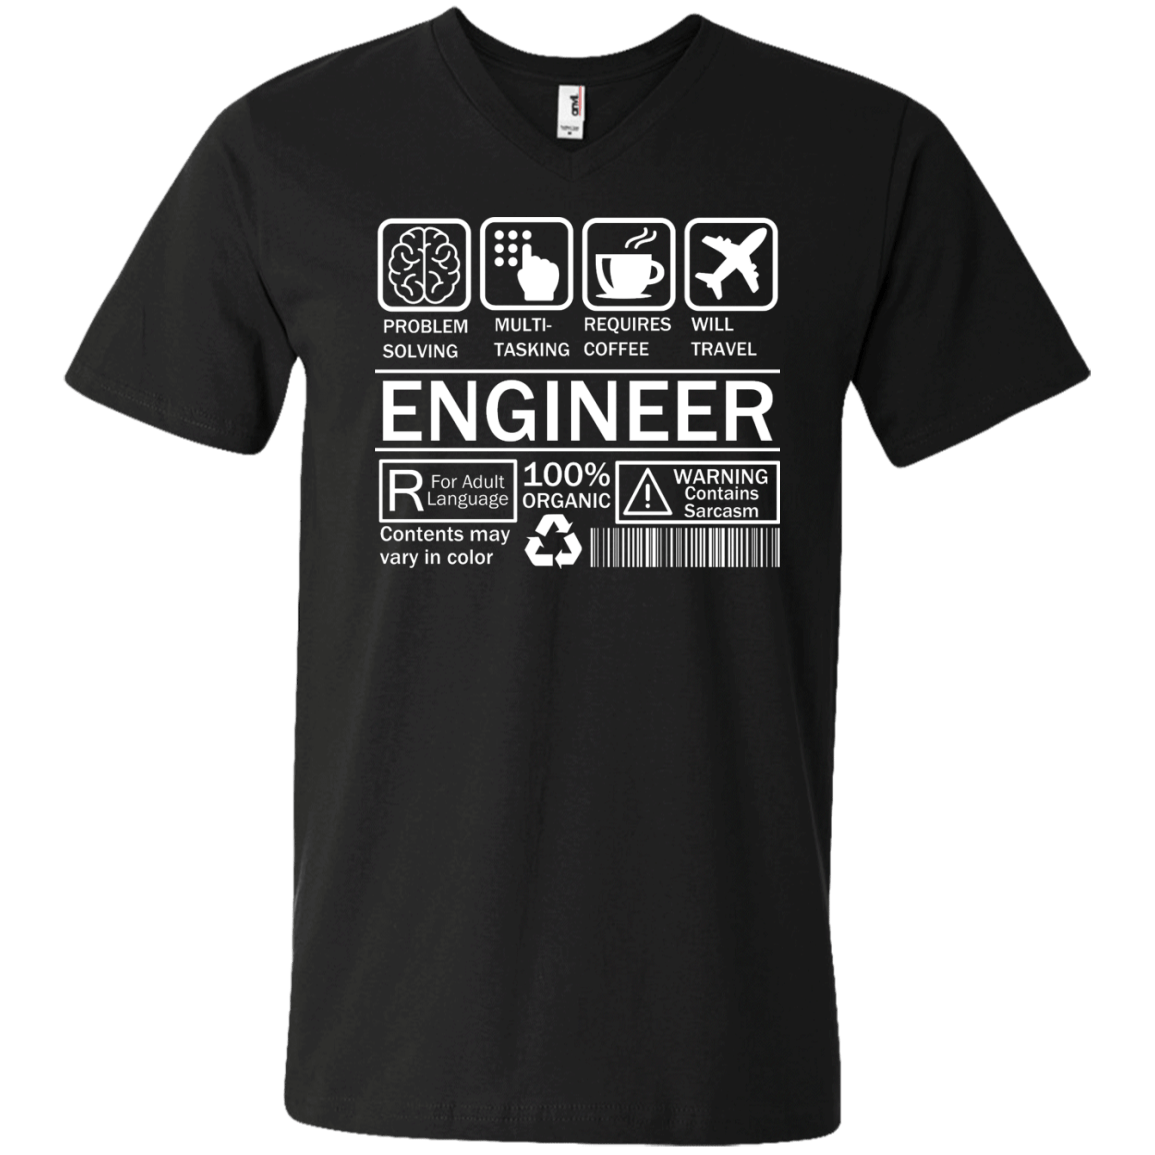 Engineer Warning Label - Engineering Outfitters